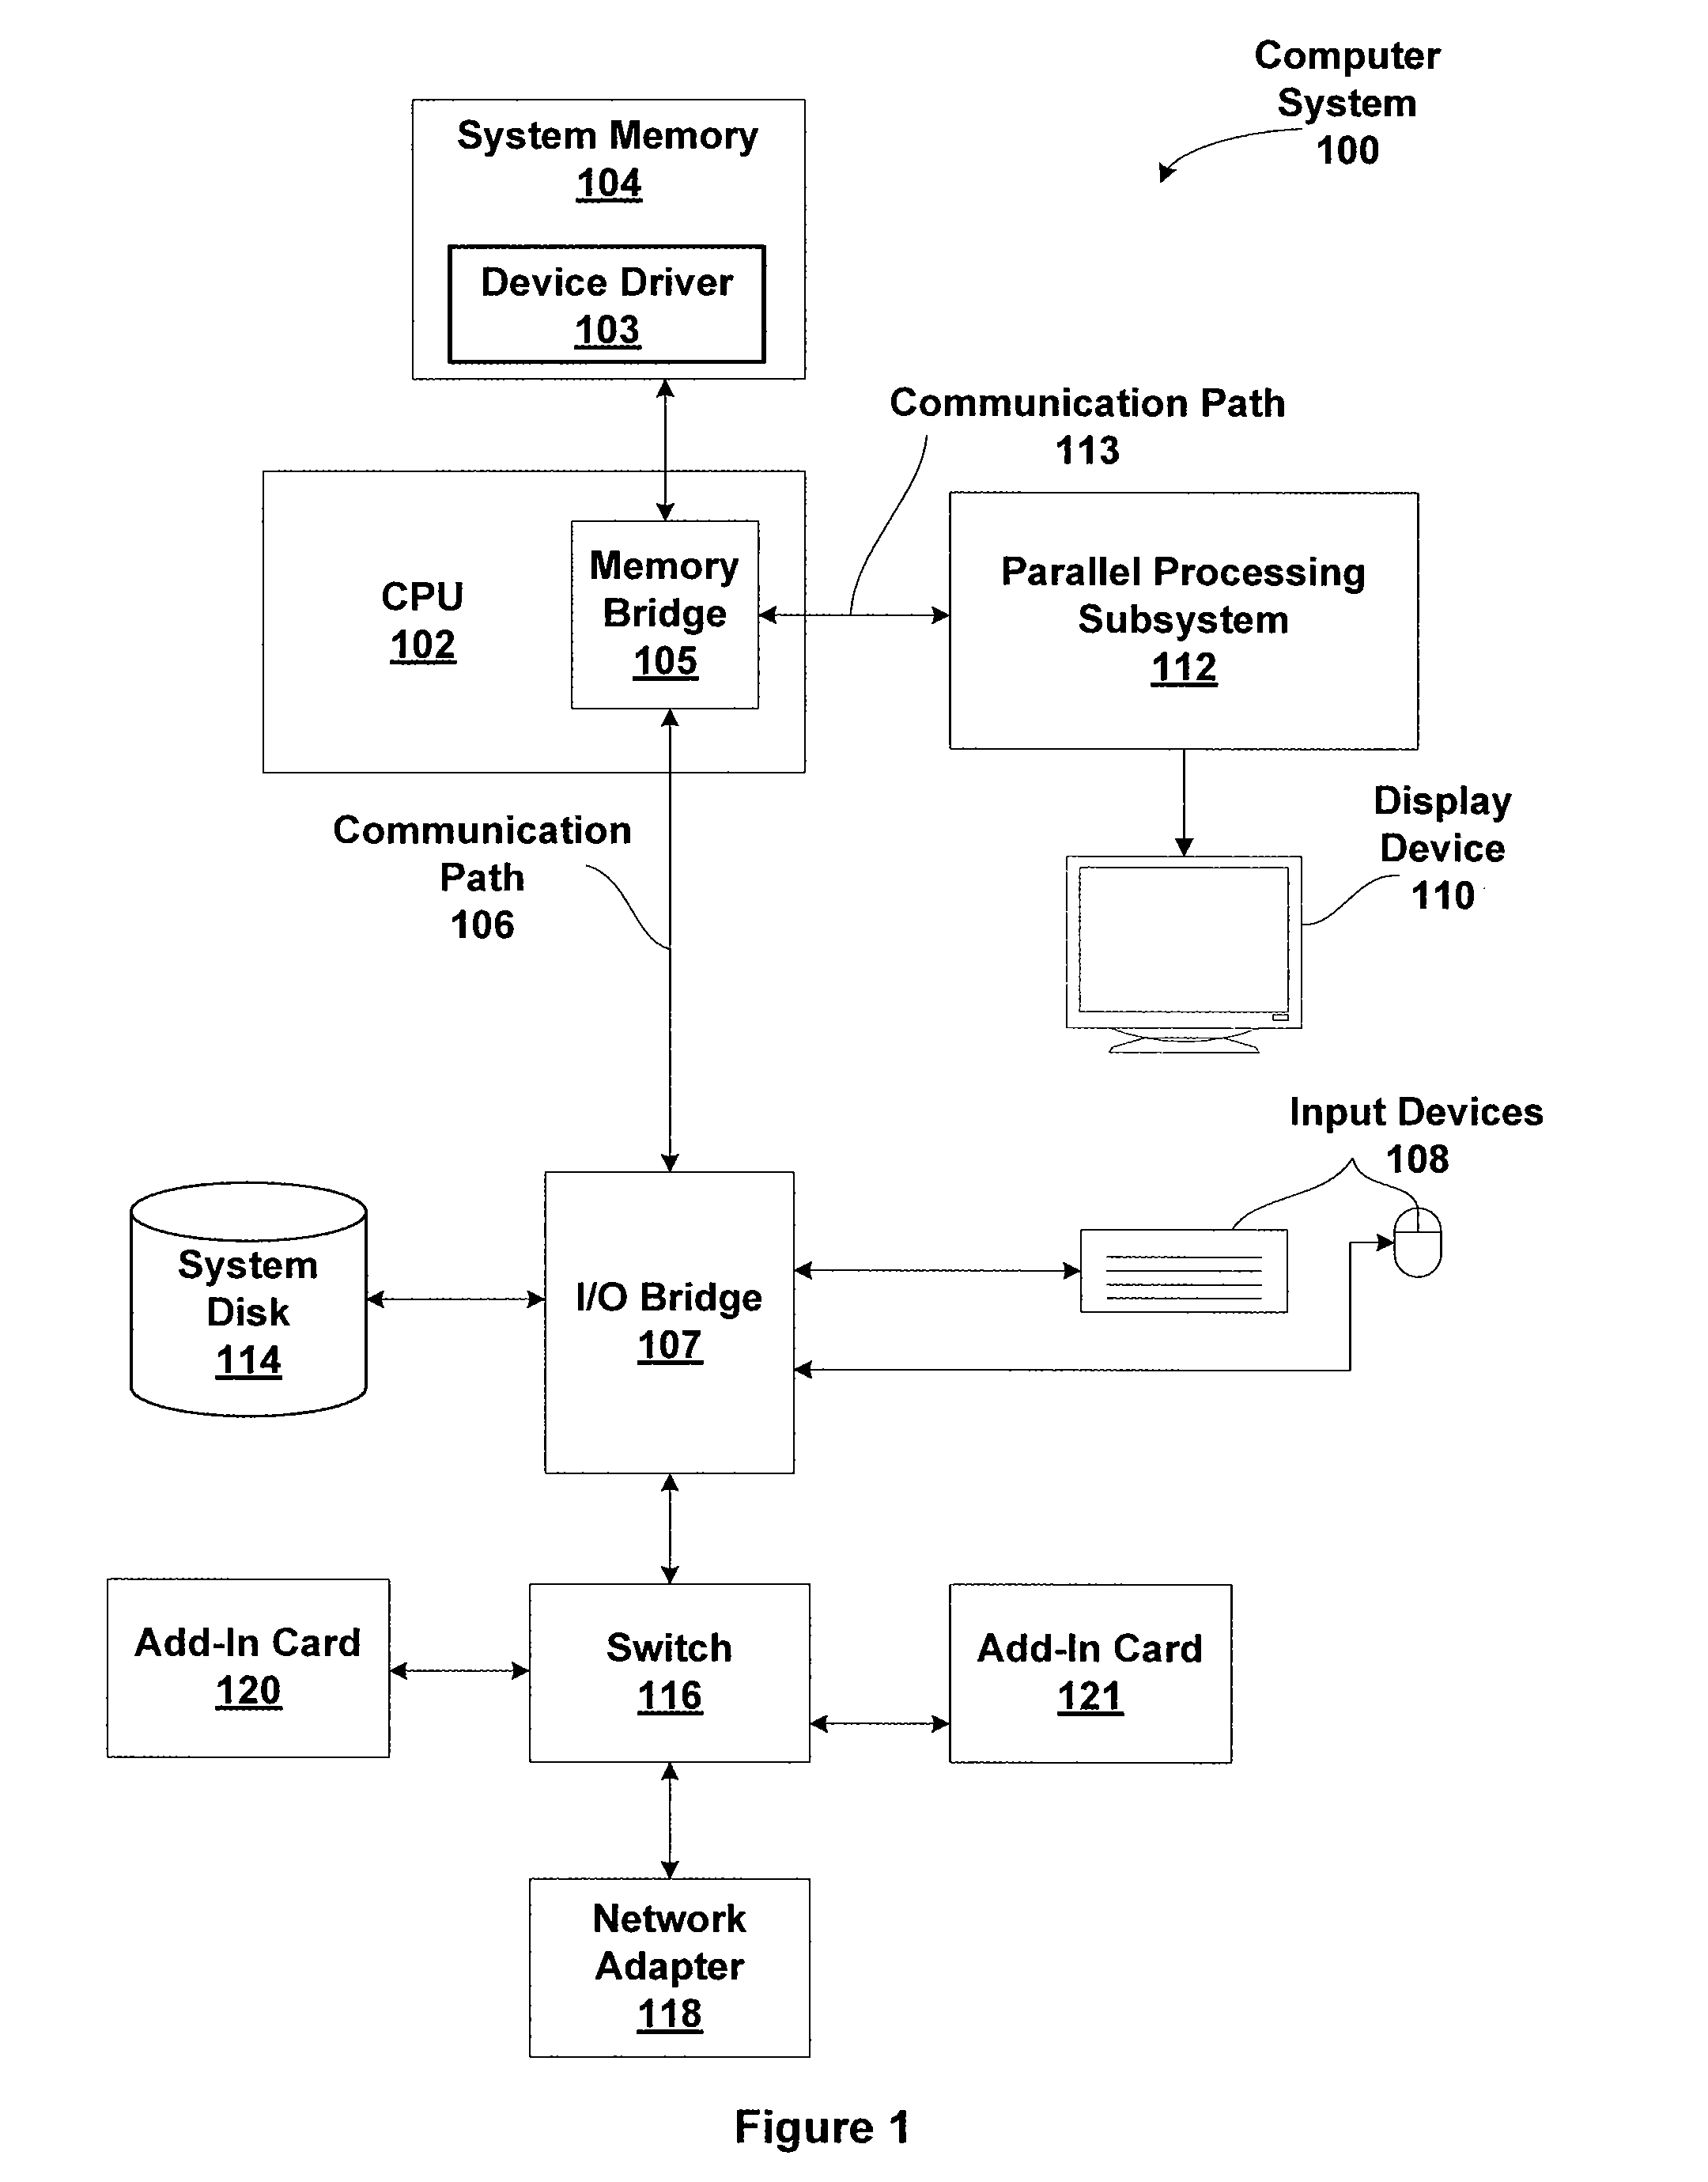 Zero-copy data sharing by cooperating asymmetric coprocessors